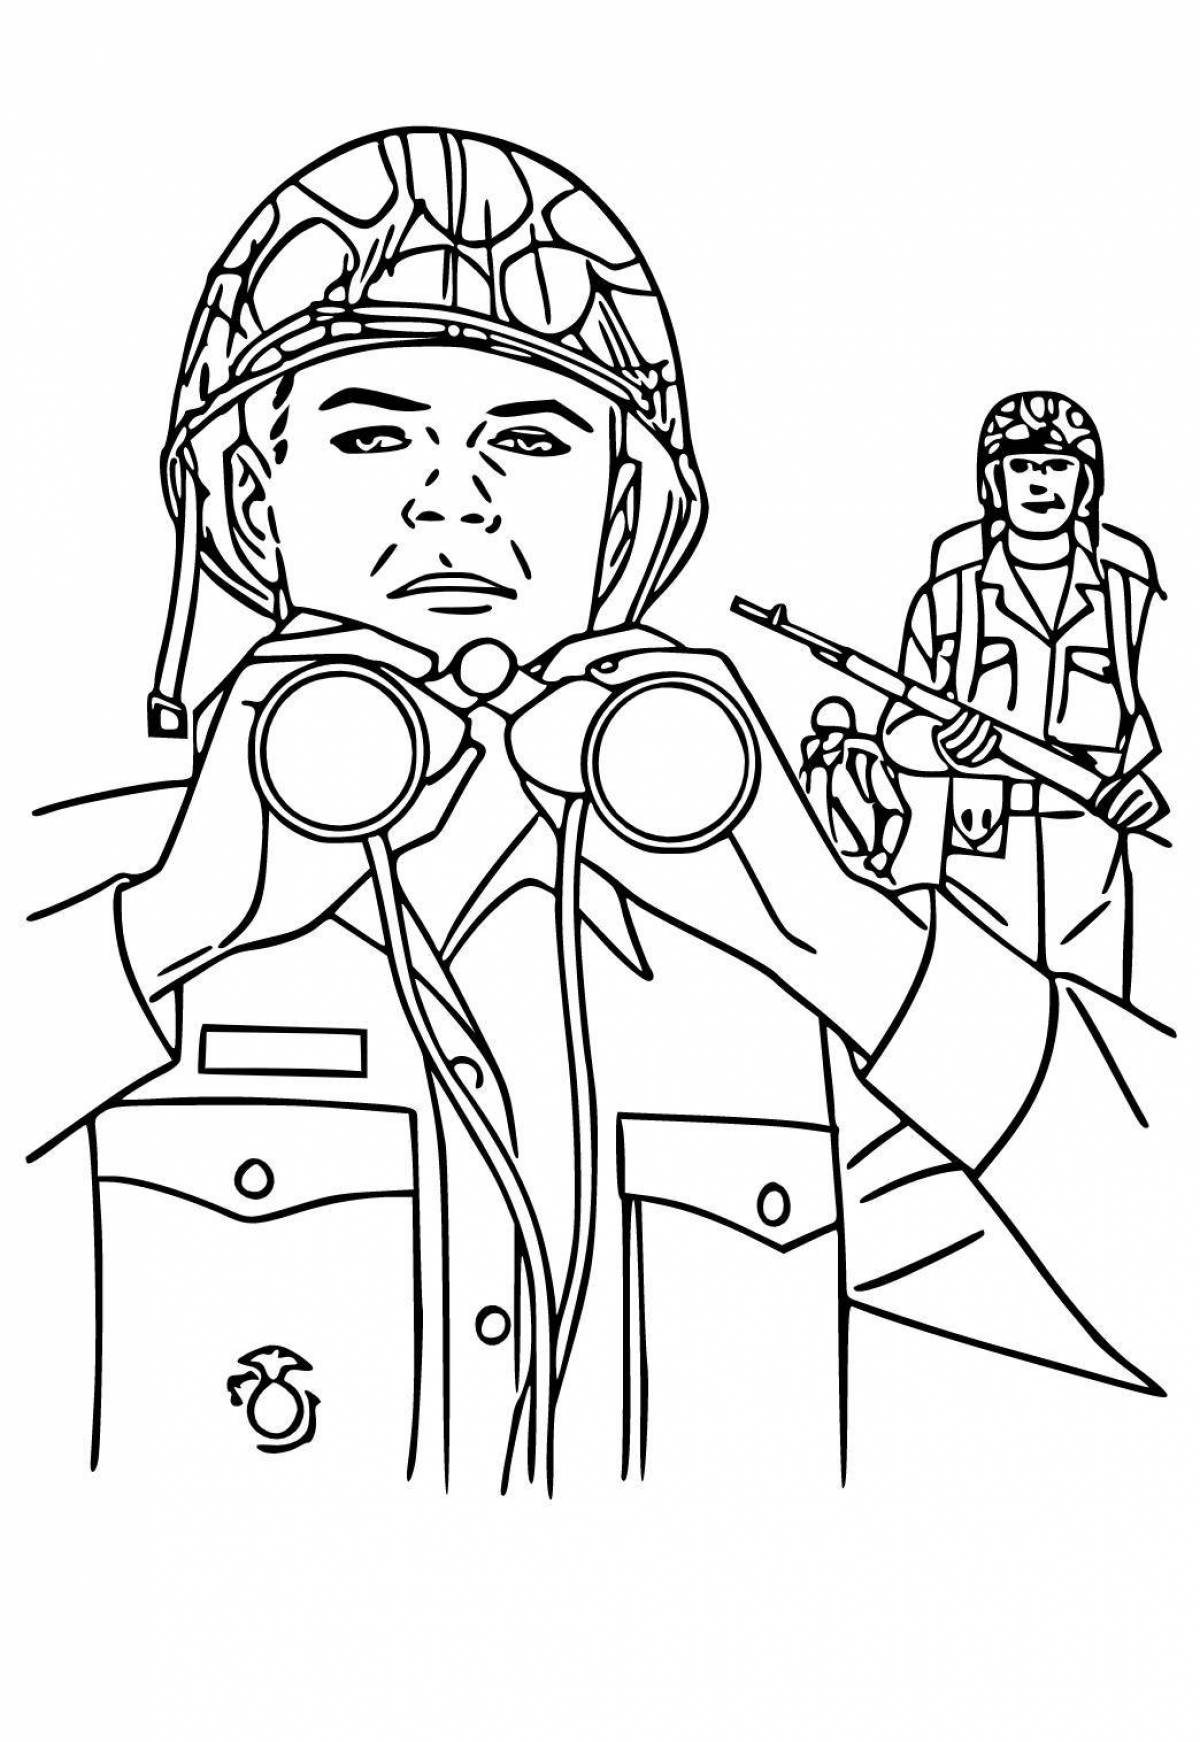 Colorful russian army coloring pages for kids